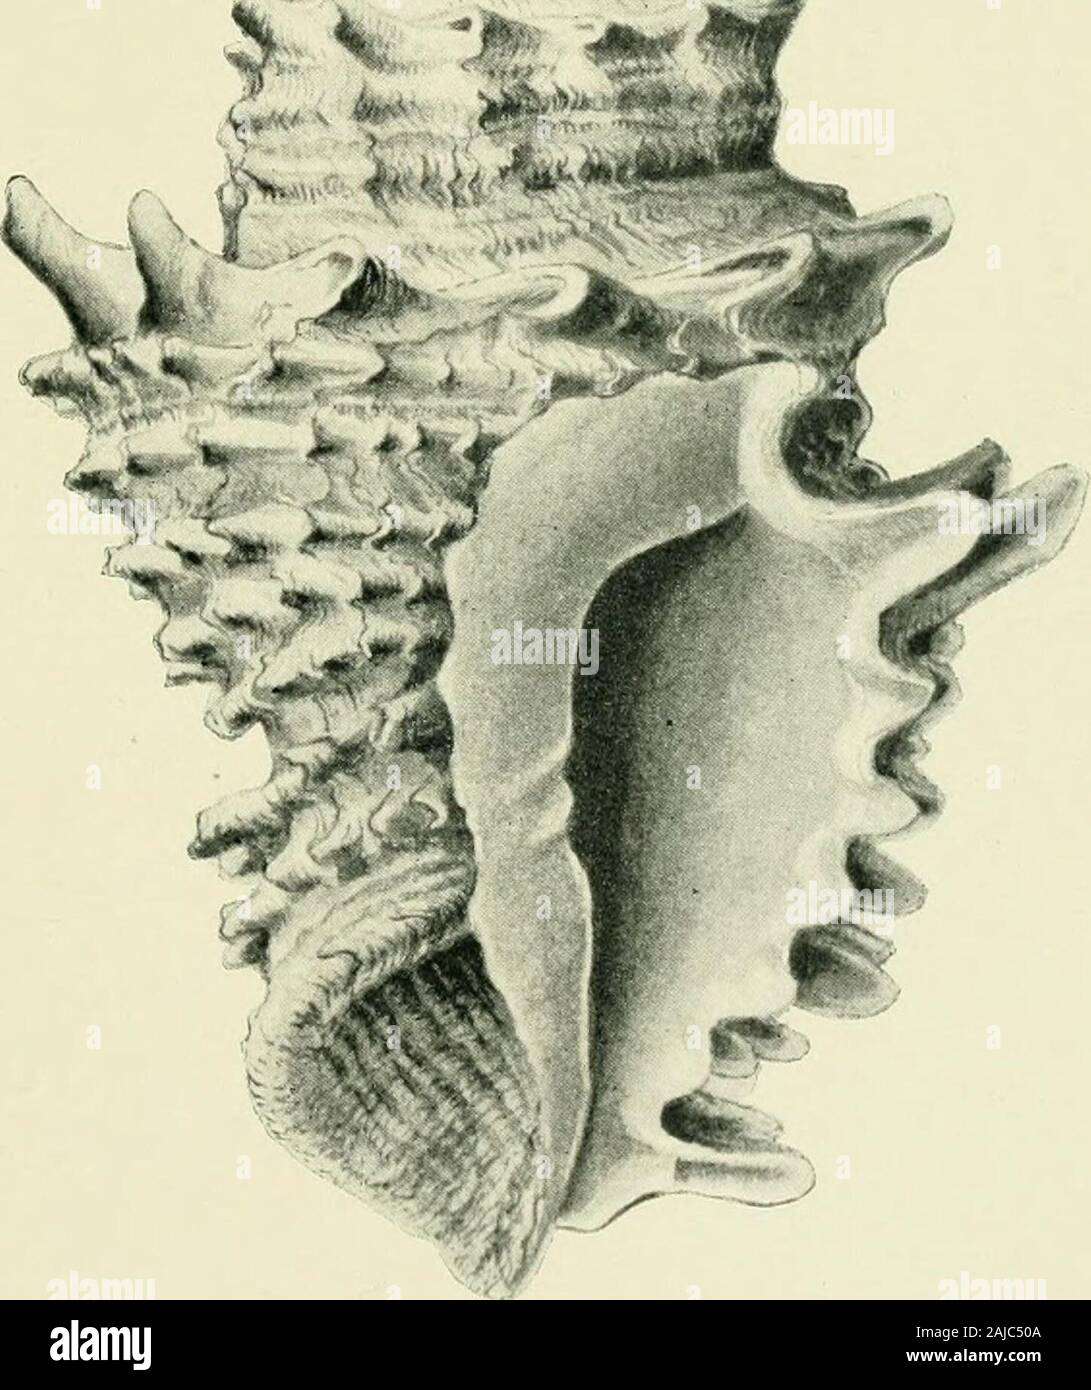 Zoological results of the fishing experiments carried on by F.I.S 'Endeavour,' 1909-14 under H.C Dannevig, commonwealth director of fisheries Volume 1-5 . P. Clarke, del., Austr. Mus EXPLANATION OF PLATE X. Fig. 3. An cilia coccinea, Hedley.Fig. 4. &lt; assidea stadialis, Hedley. ZOOL. RESULTS ENDEAVOUR, Vol. II. Plate X. Stock Photo